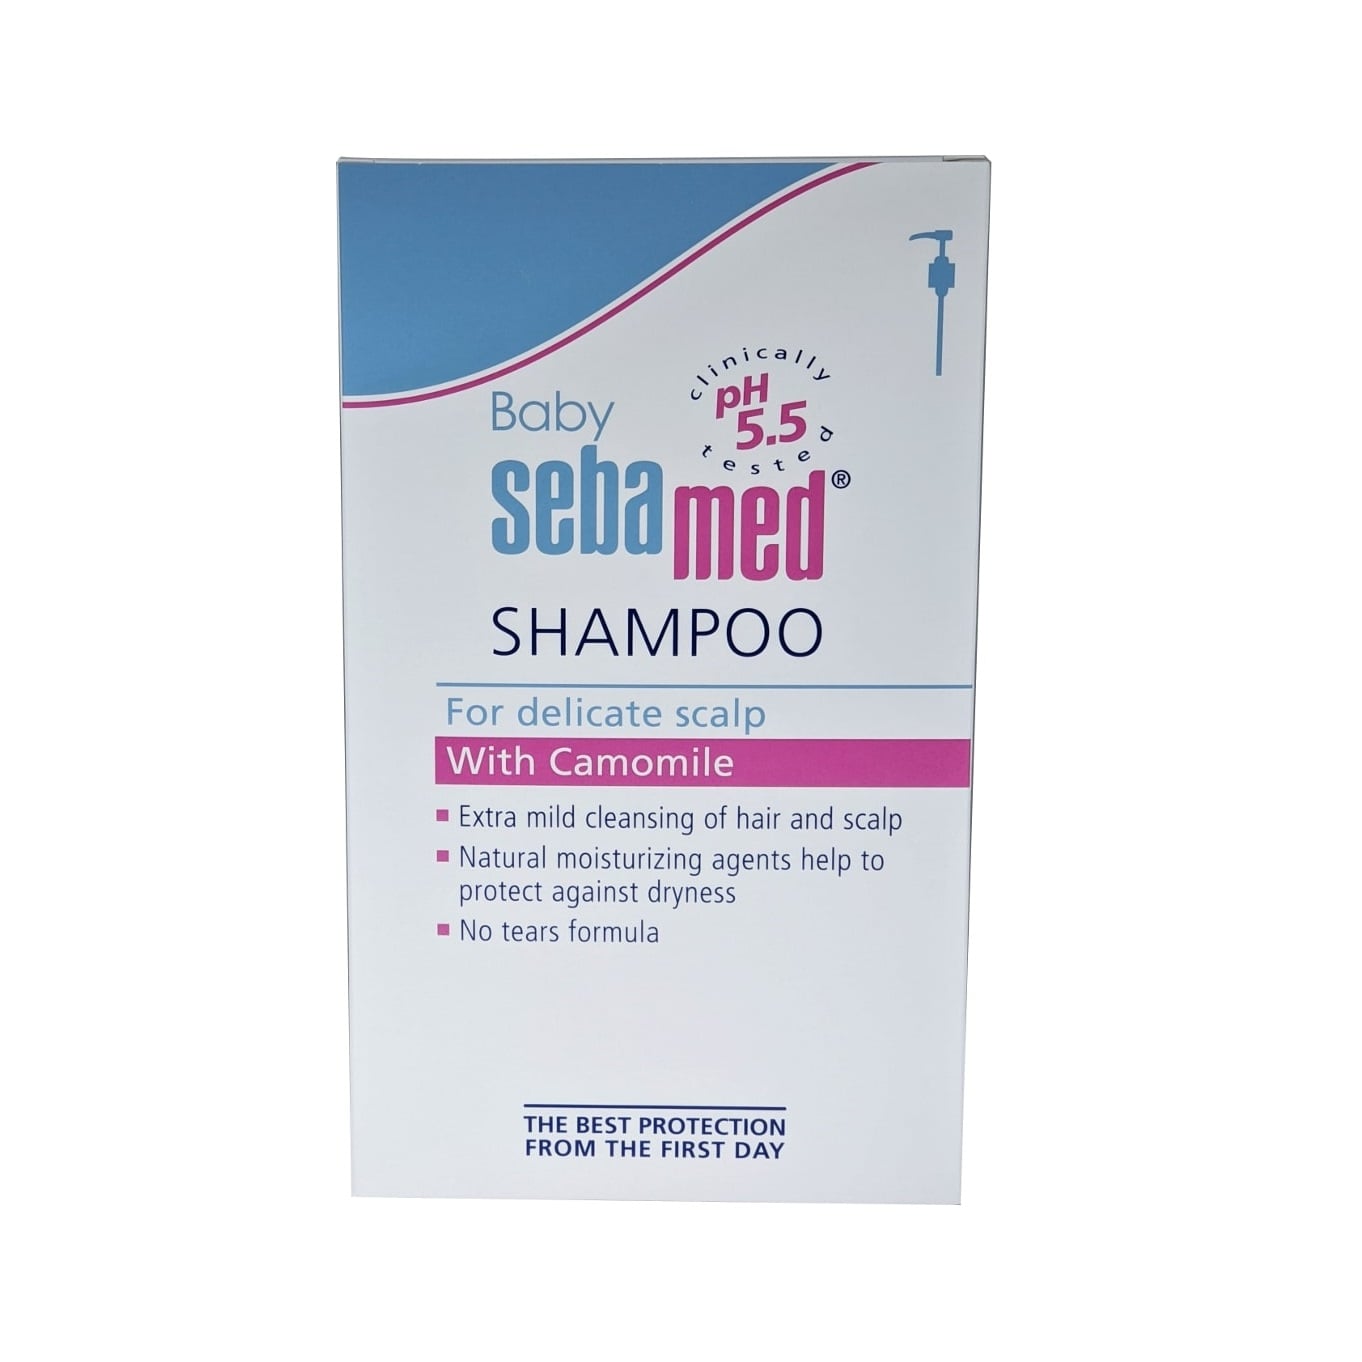 Product label for Baby Sebamed Shampoo with Camomile 500 mL in English